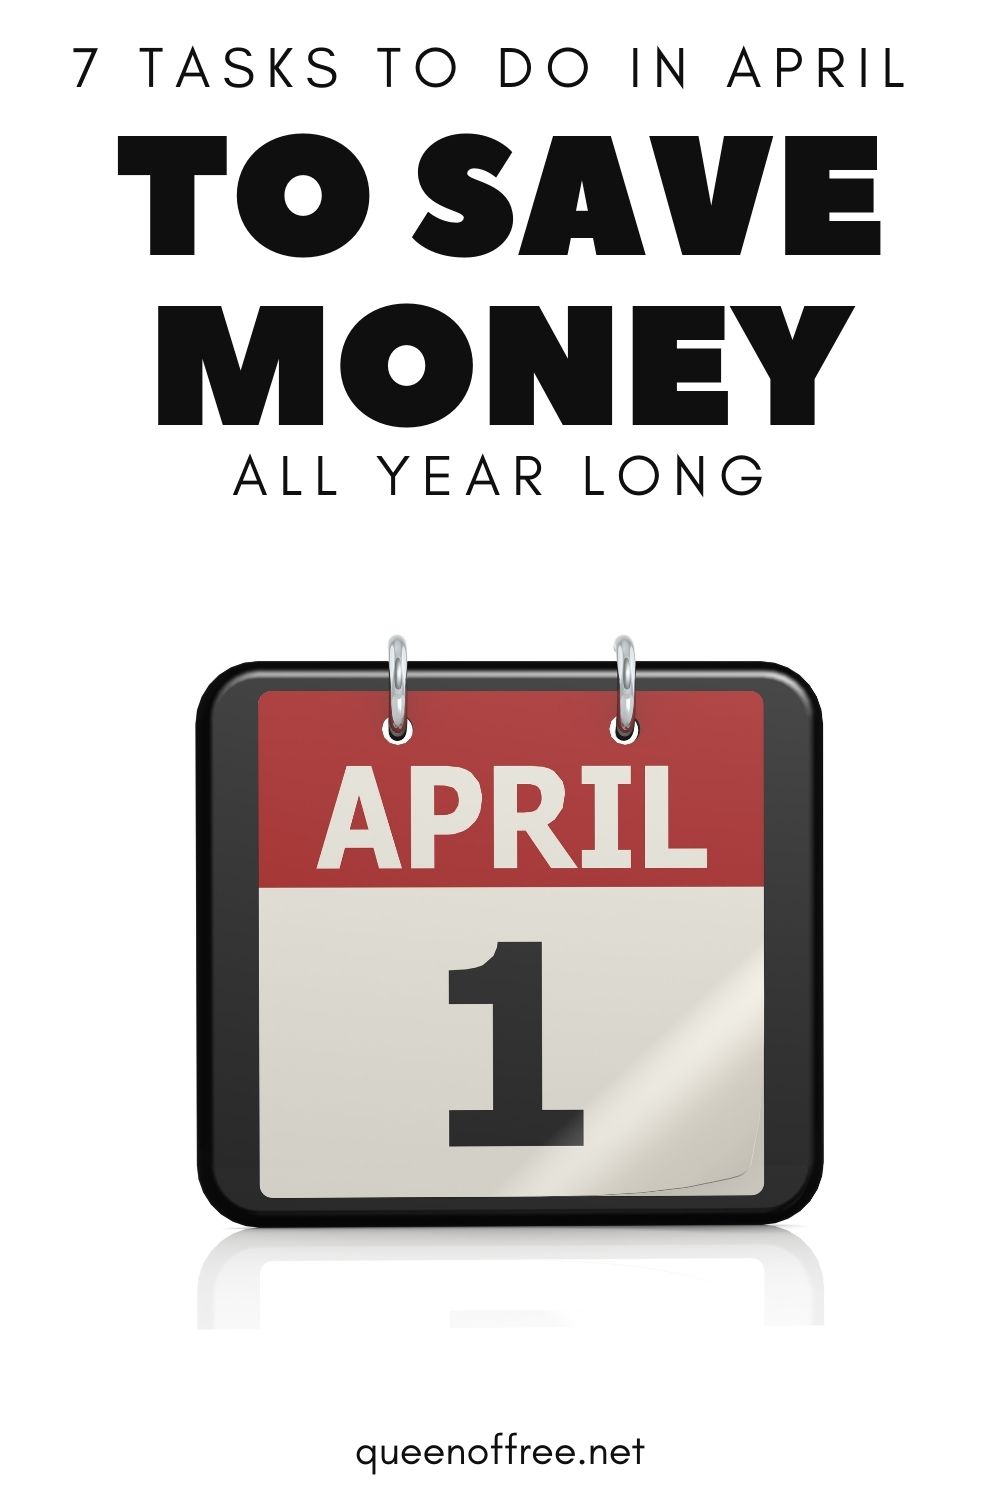 Check out these simple 7 April Money Saving Tips! Complete the tasks and you're certain to save money all year long.